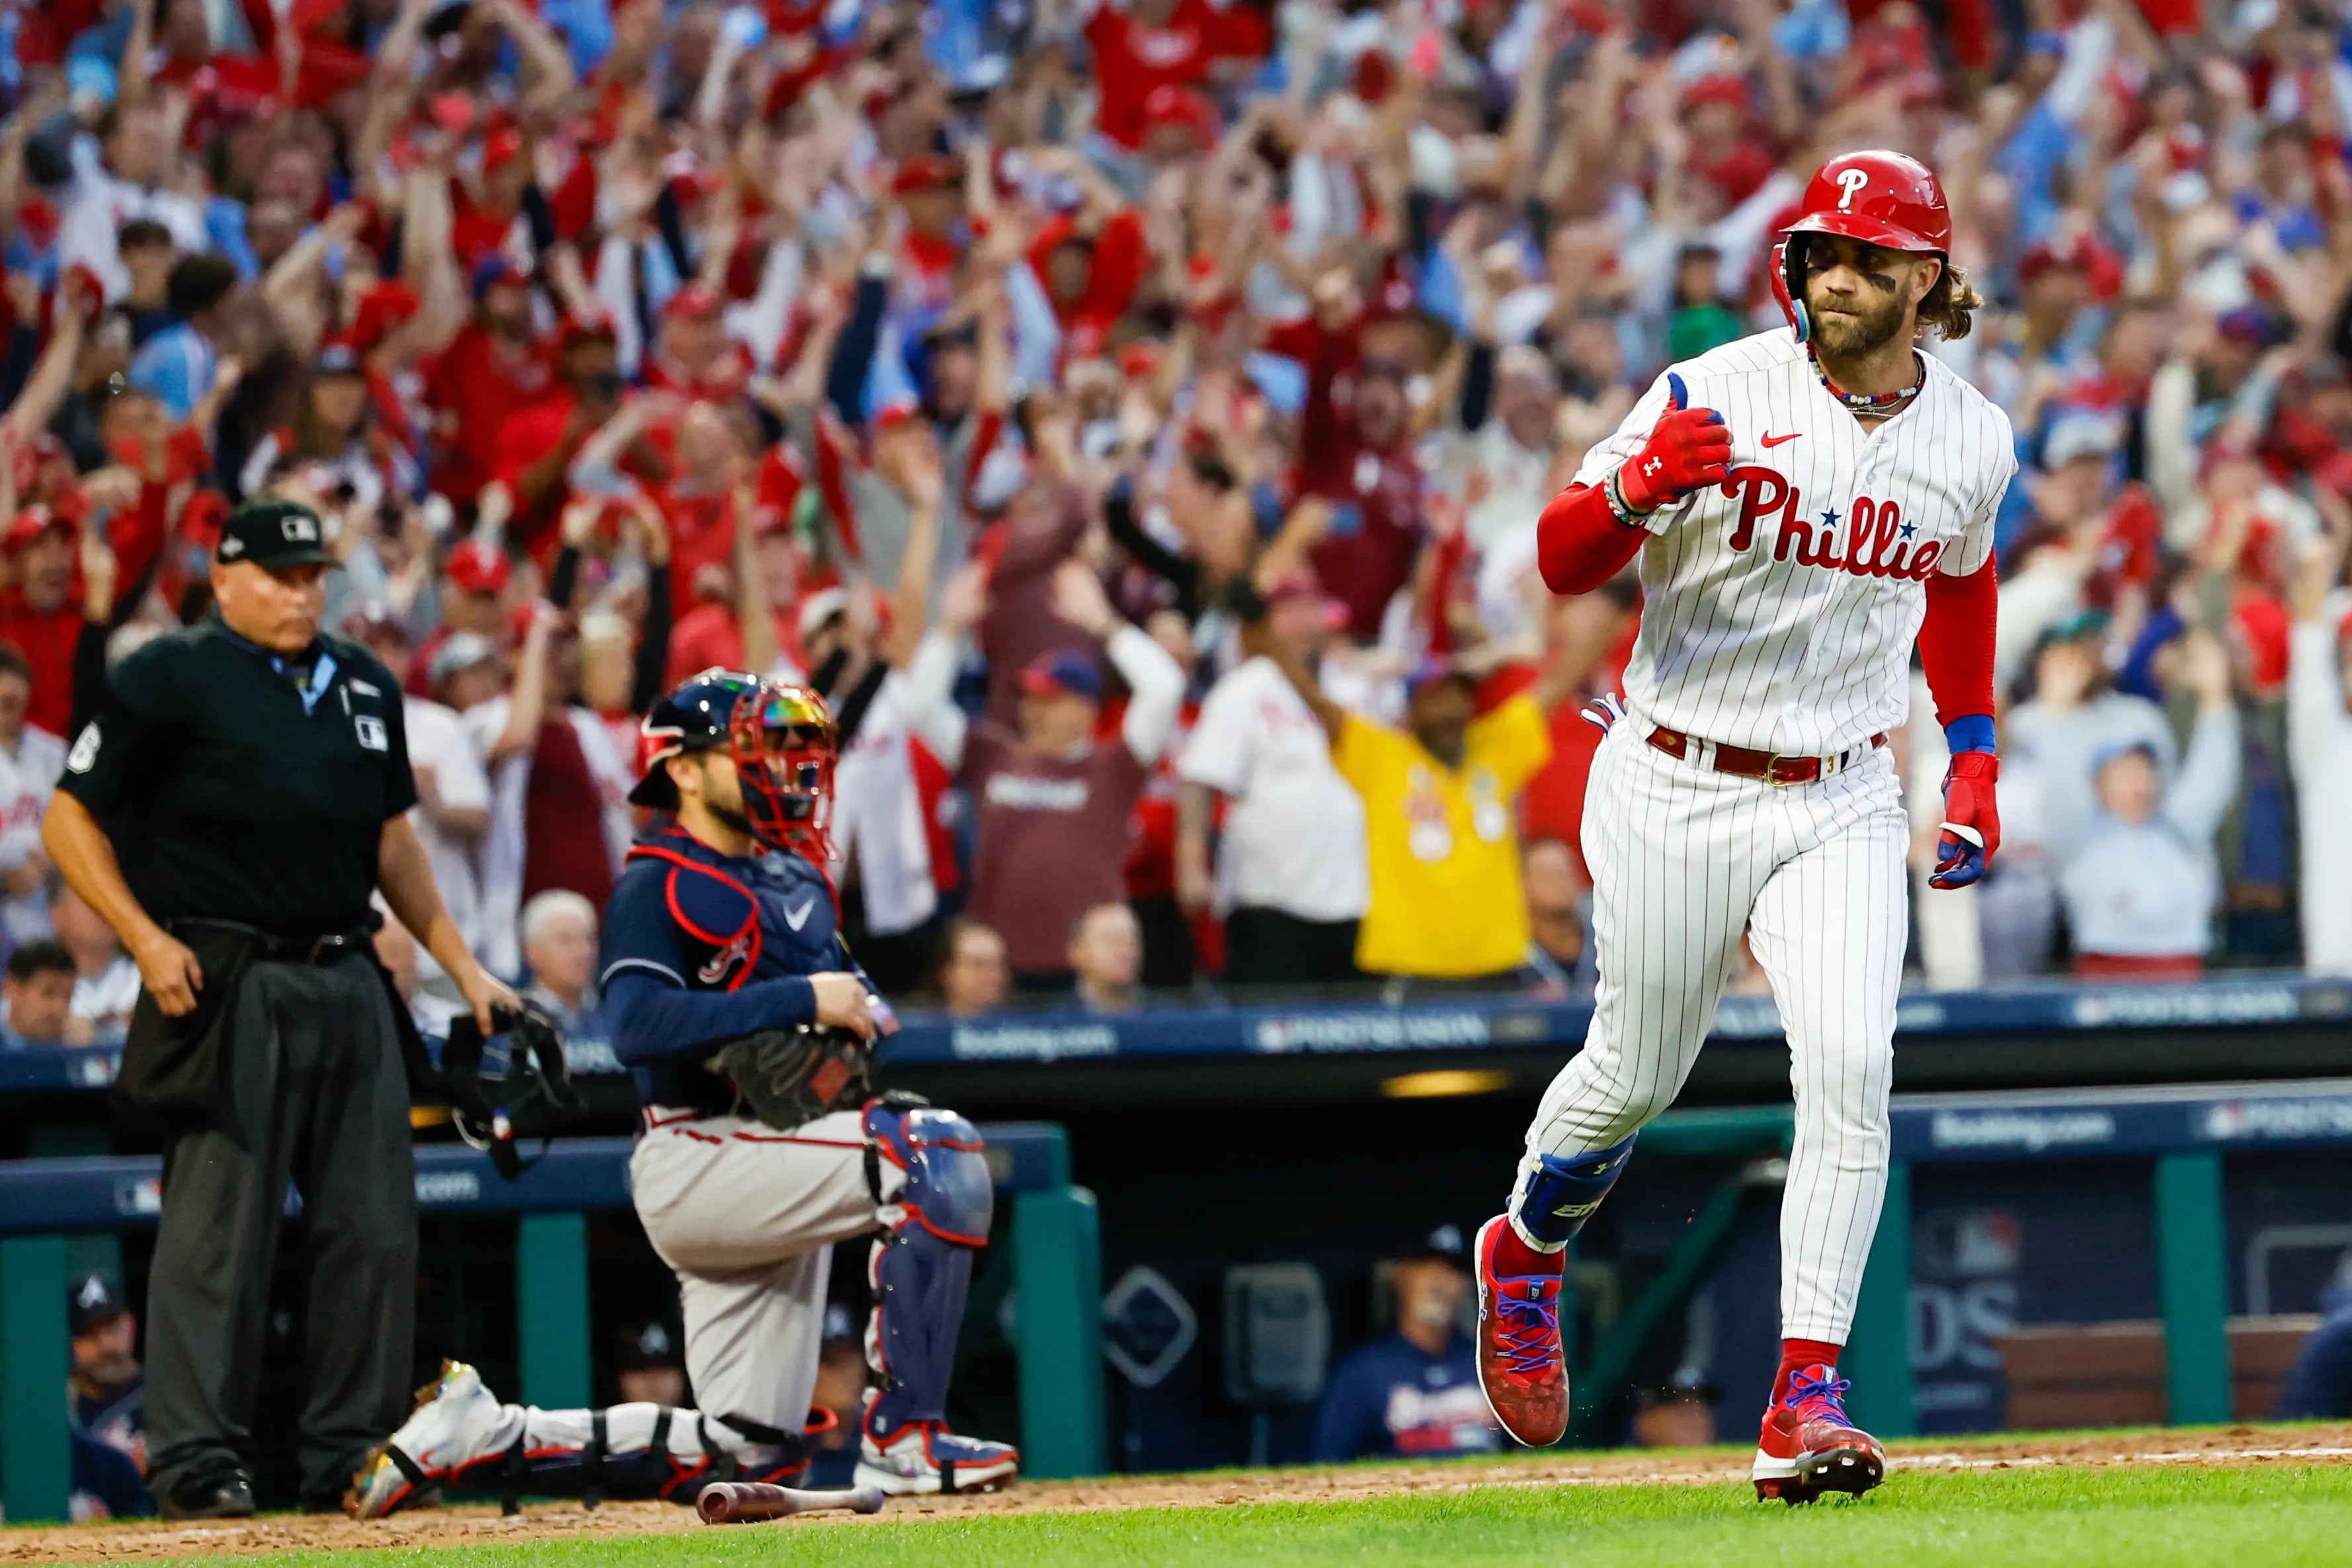 Phillies fans chant 'We want Houston' after NLCS win